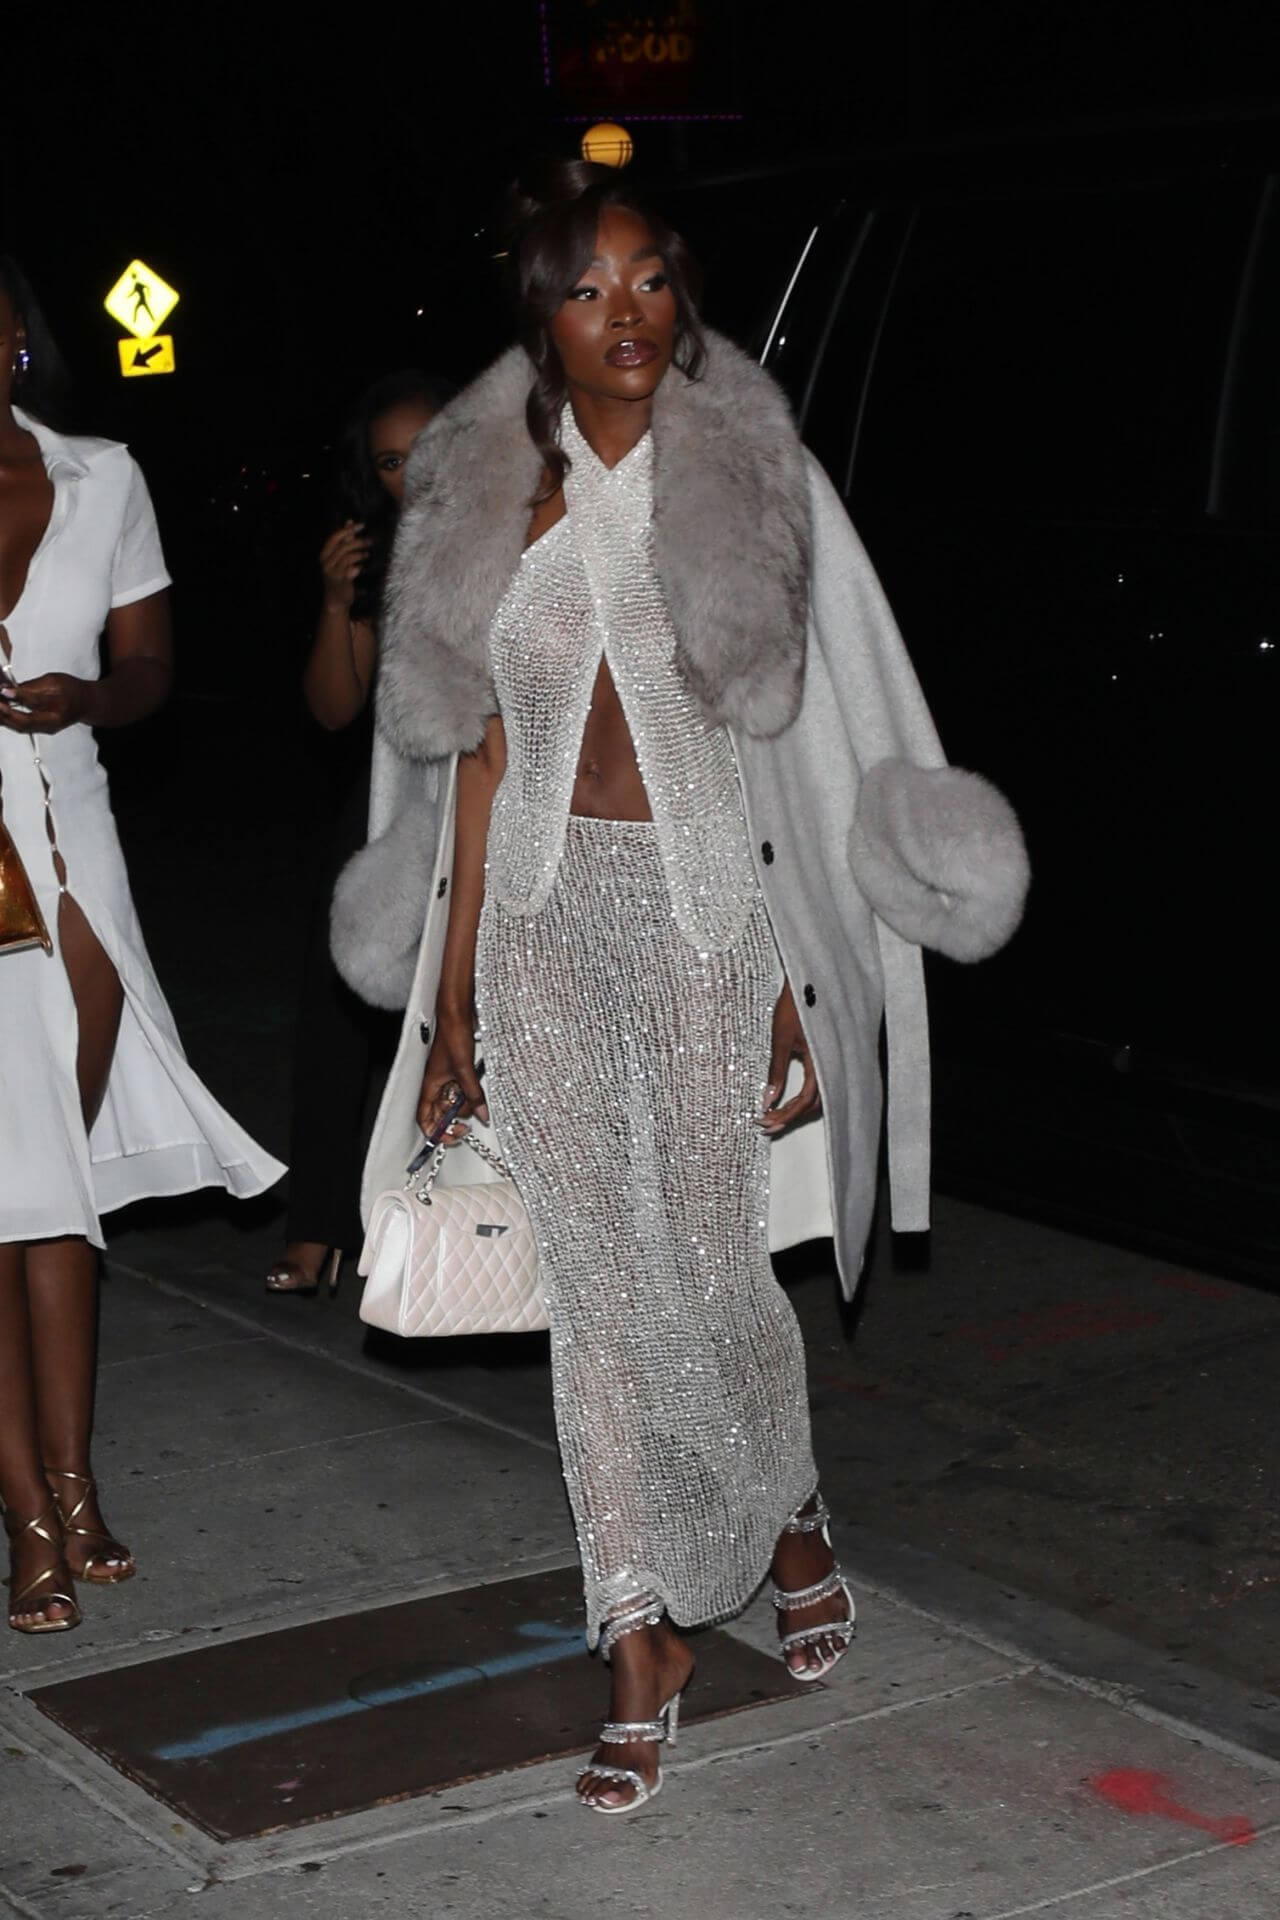 Chelsea Lazkani  In White Fur Overcoat With Shimmery Crochet Outfit At Delilah Restaurant in West Hollywood